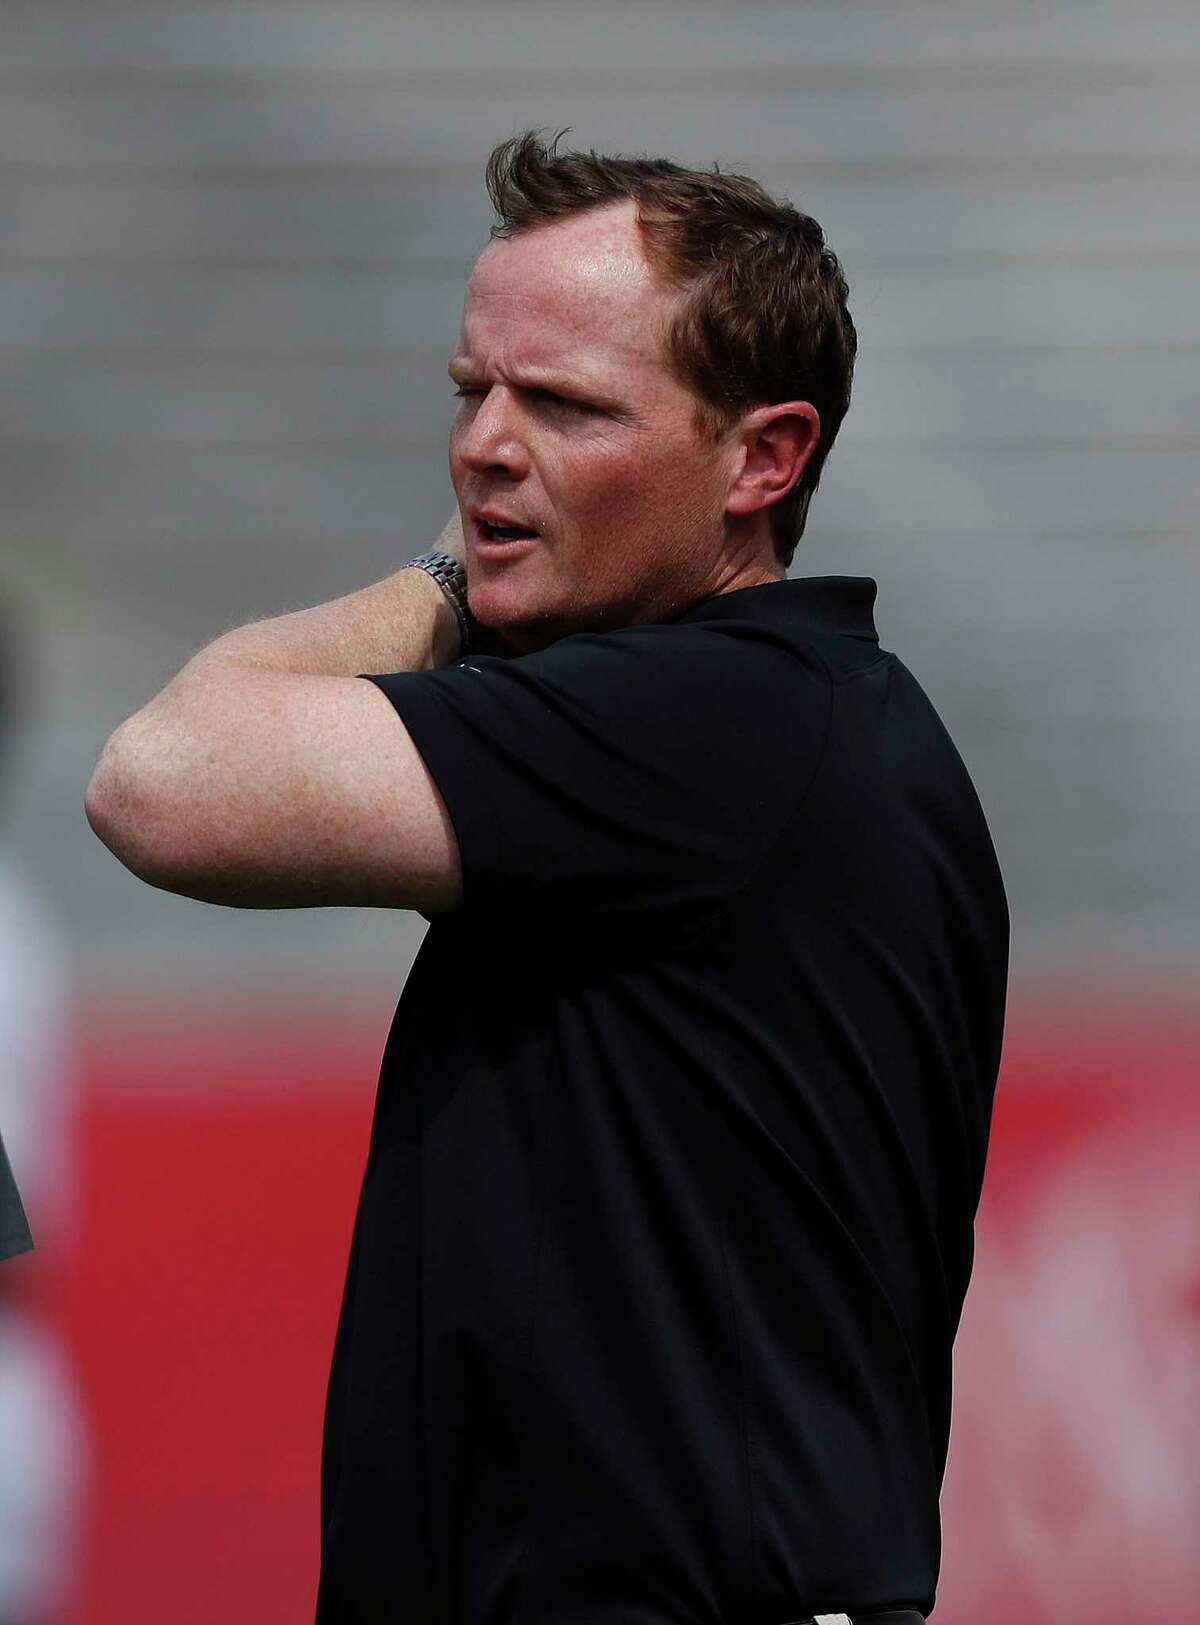 When new UH coach Major Applewhite surveys the practice field this spring, he sees only 44 available players.